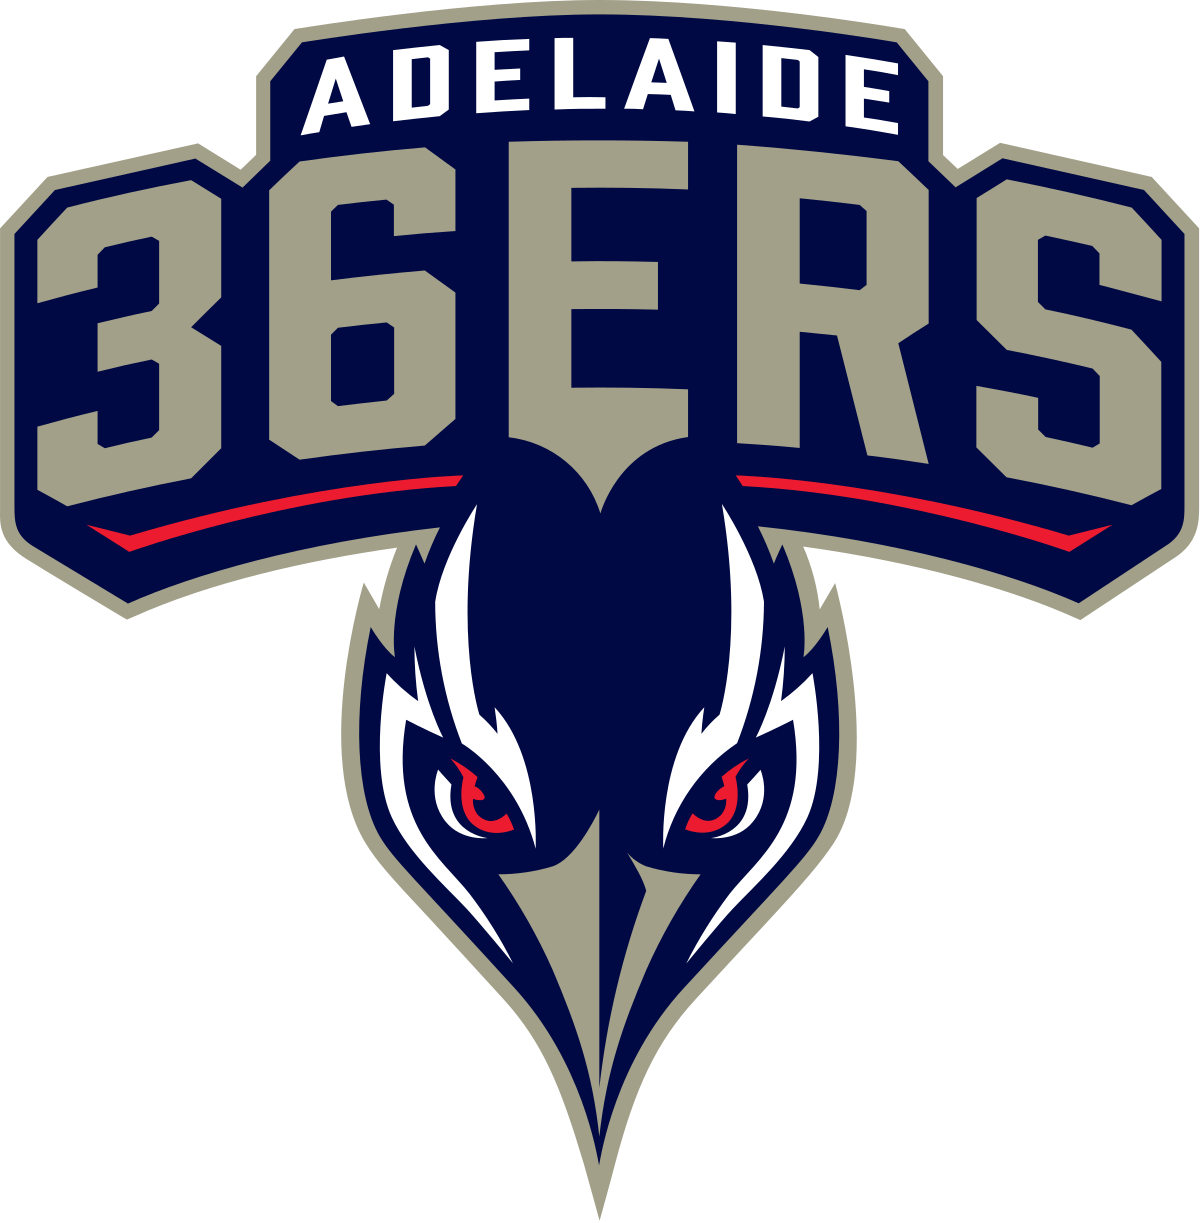 Adelaide 36Ers Wallpapers